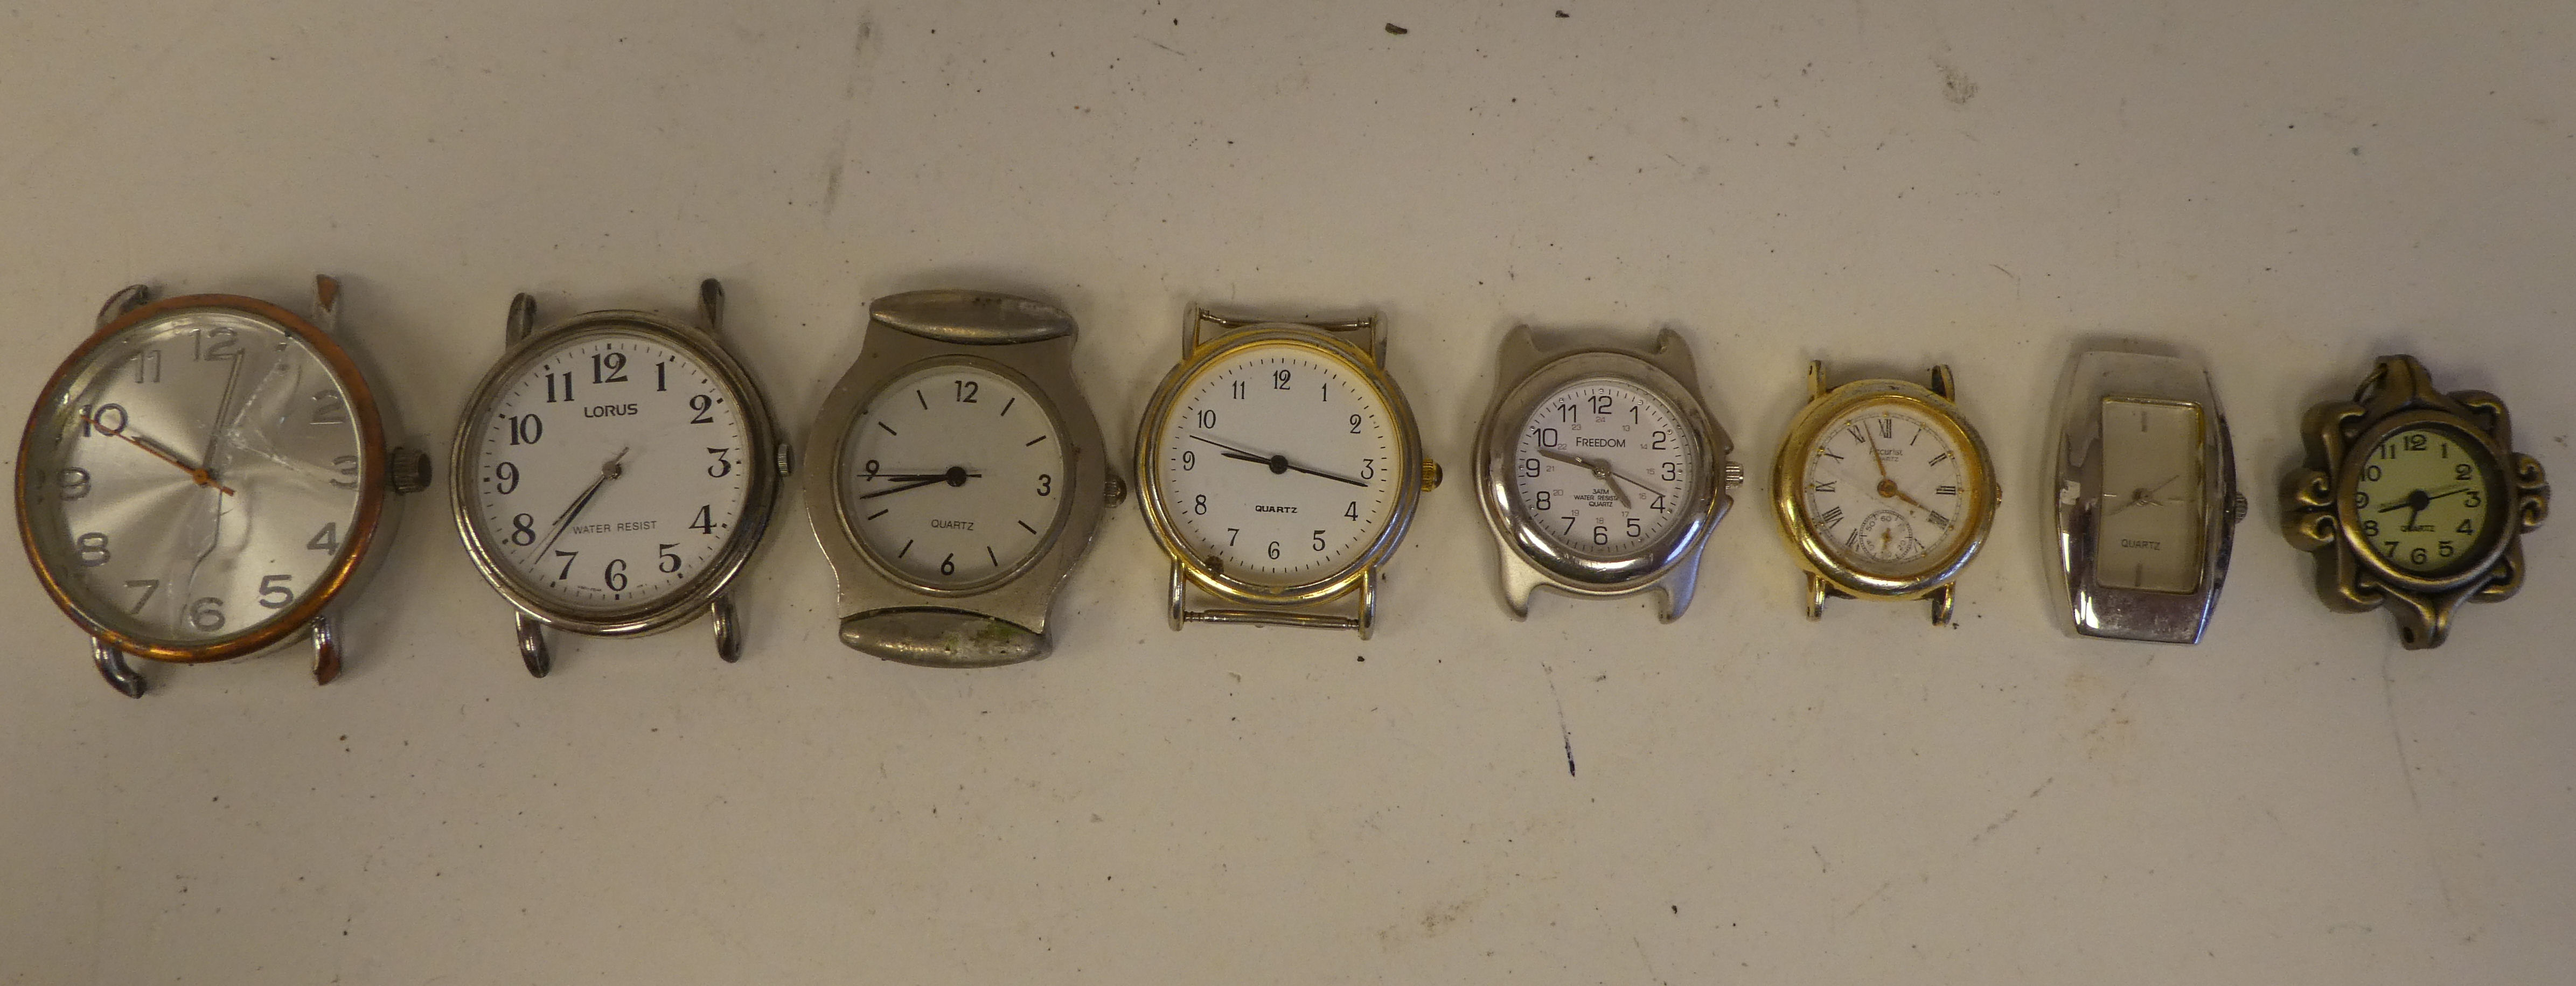 Variously cased and strapped wristwatches - Image 11 of 47